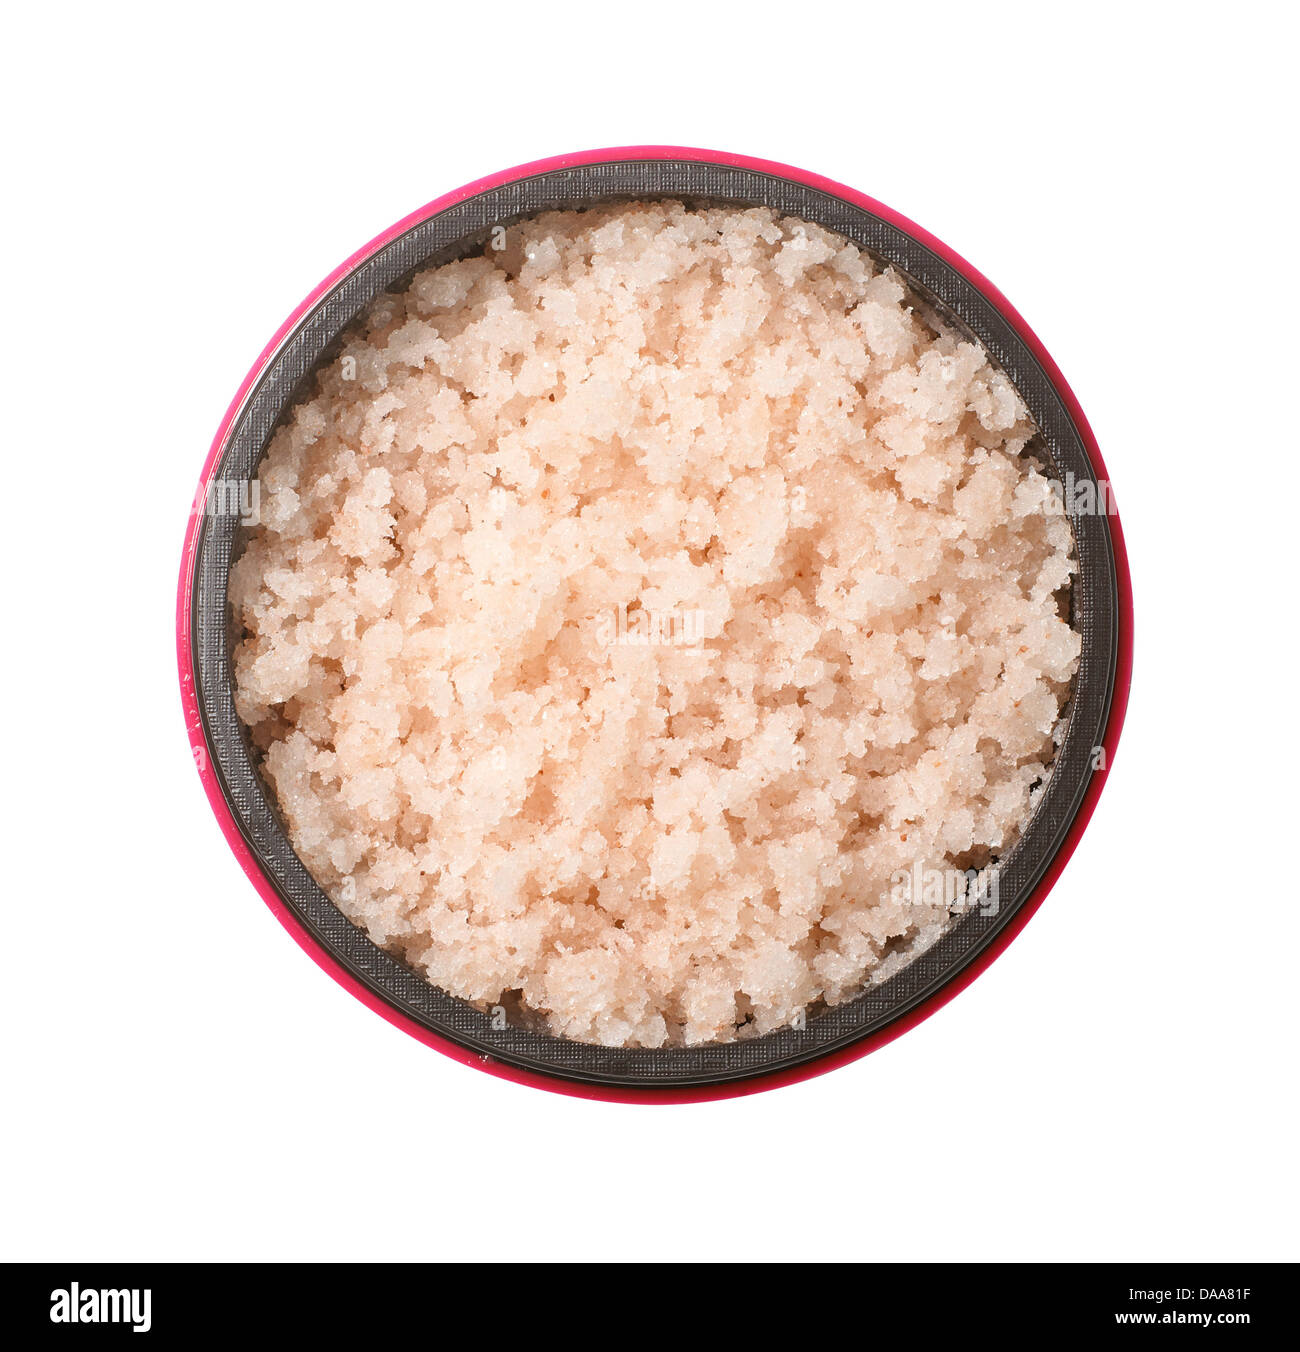 pink beige body scrub salts cut out onto a white background Stock Photo